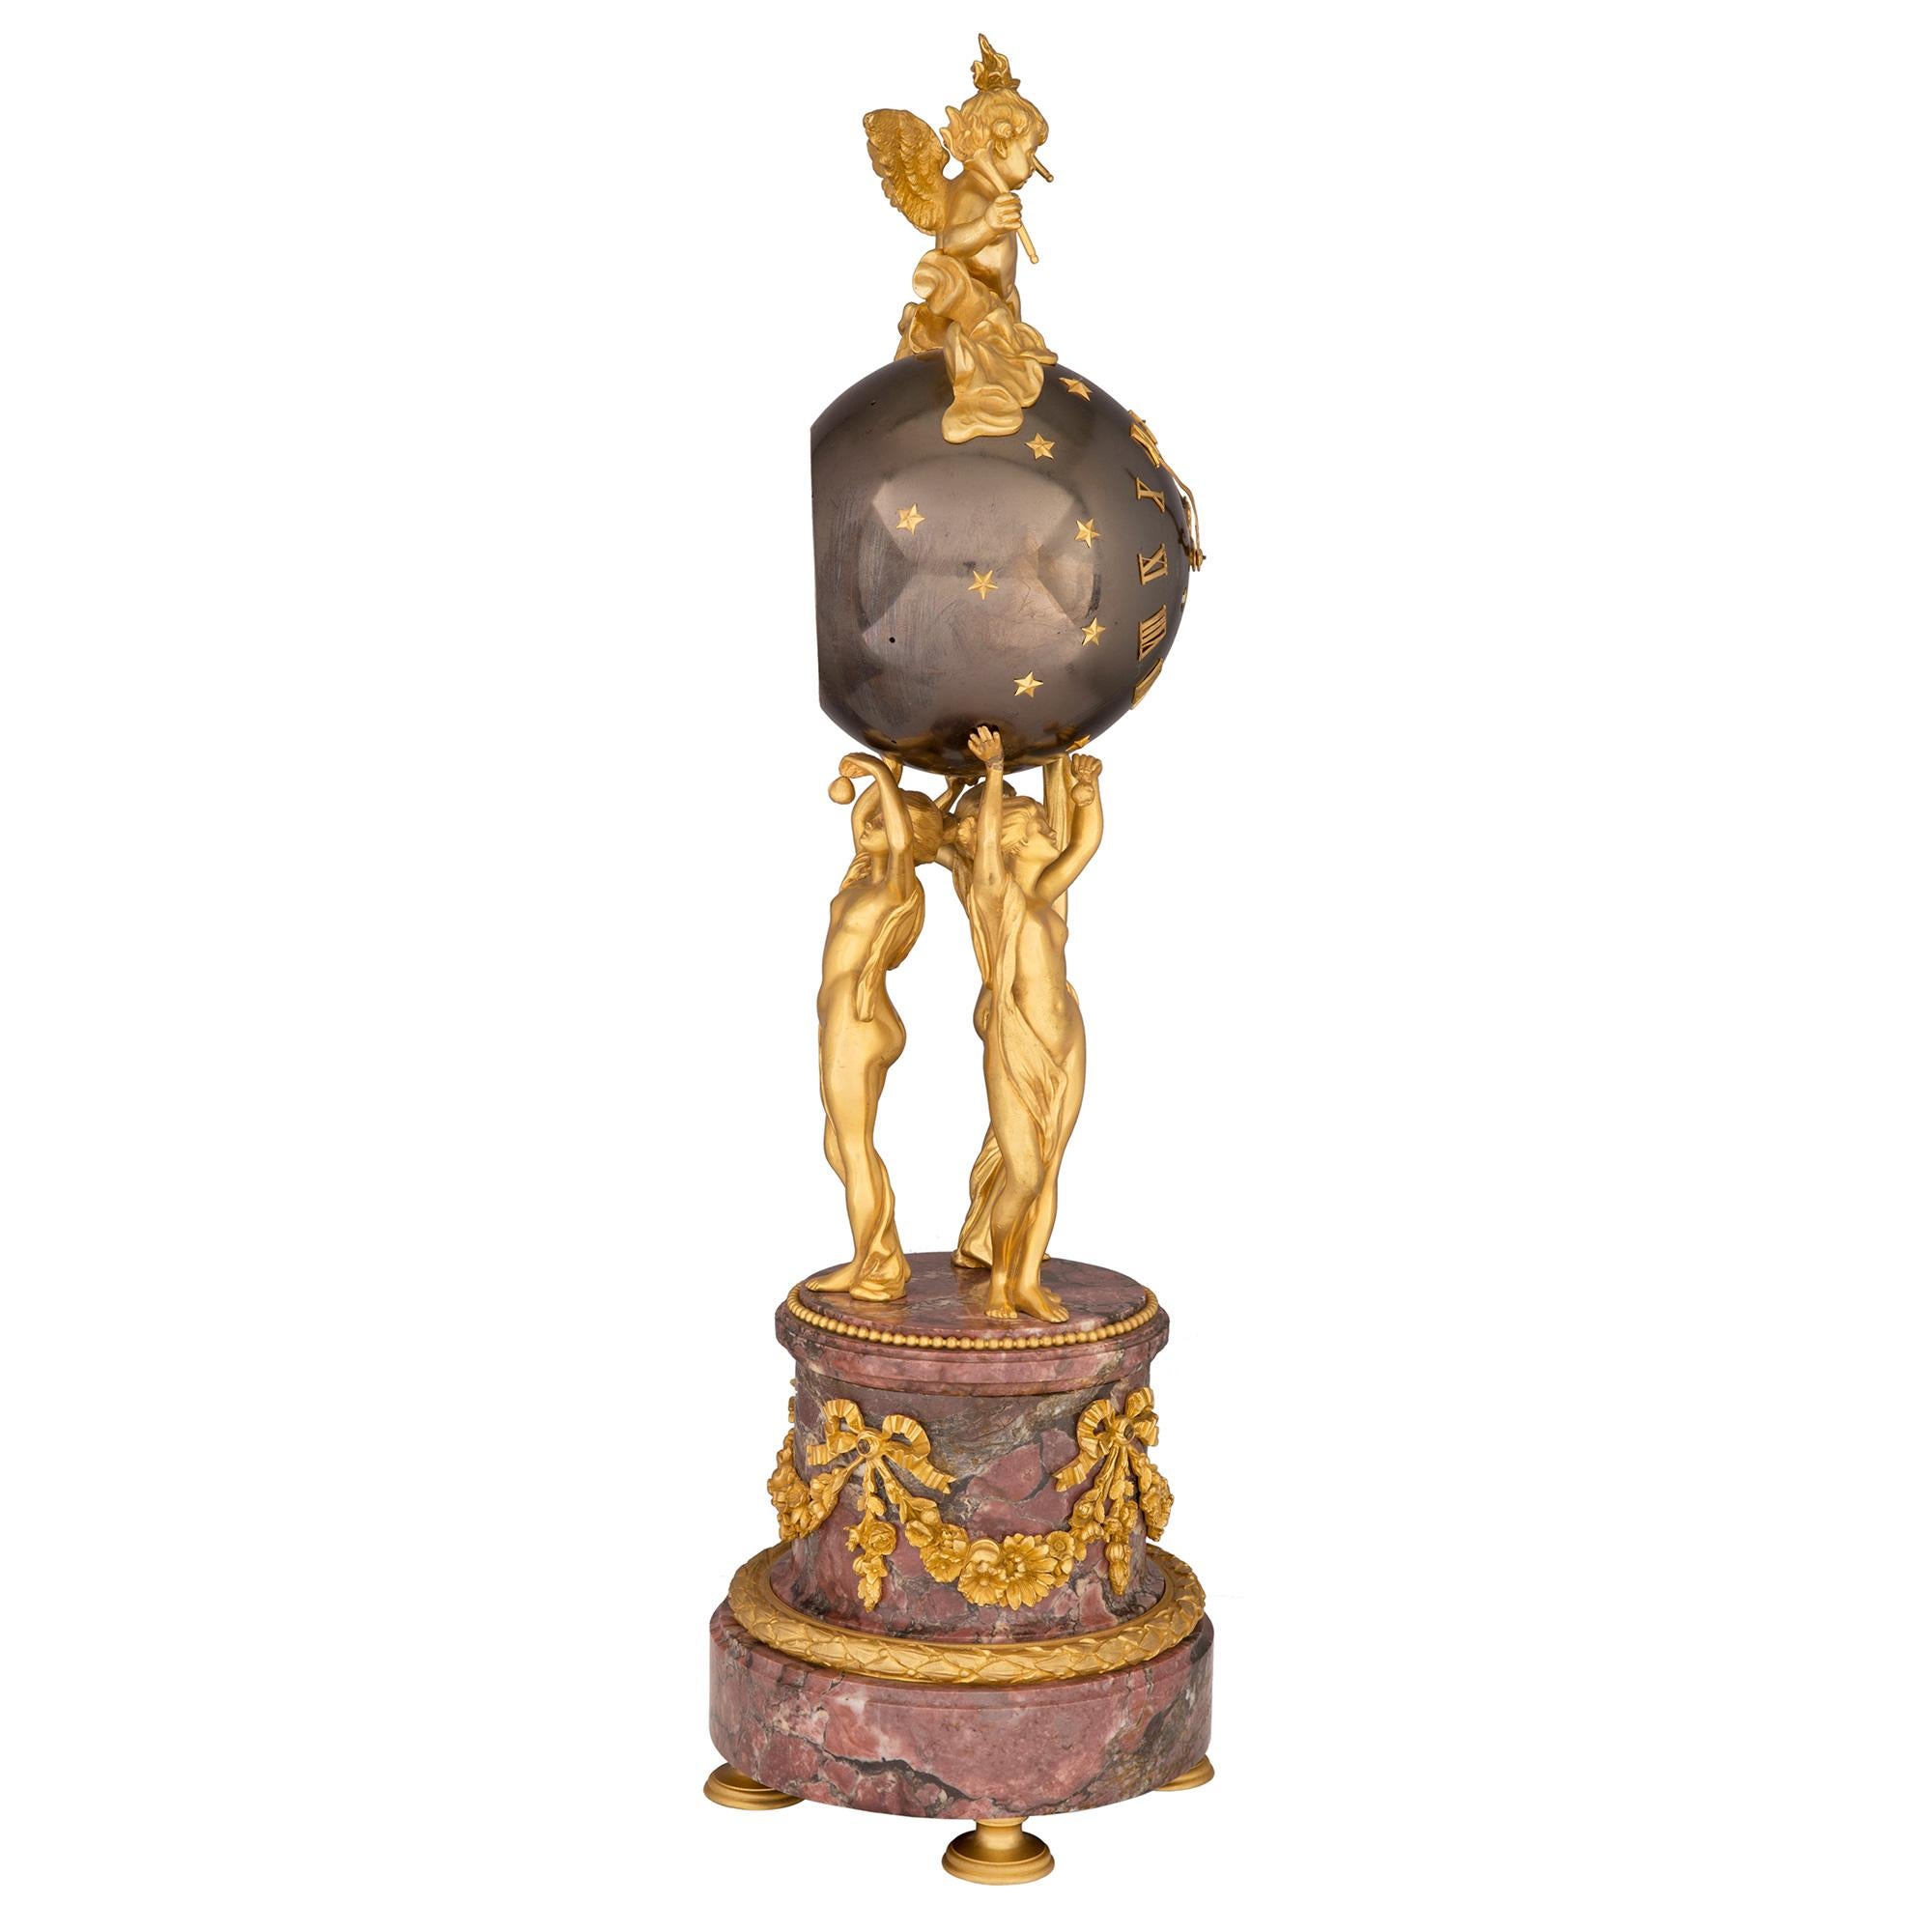 A stunning and most unique French 19th century Louis XVI st. ormolu, patinated bronze and marble clock, stamped Vincent 1855. The clock is raised by fine ormolu supports below the circular marble base decorated with a charming wrap around berried